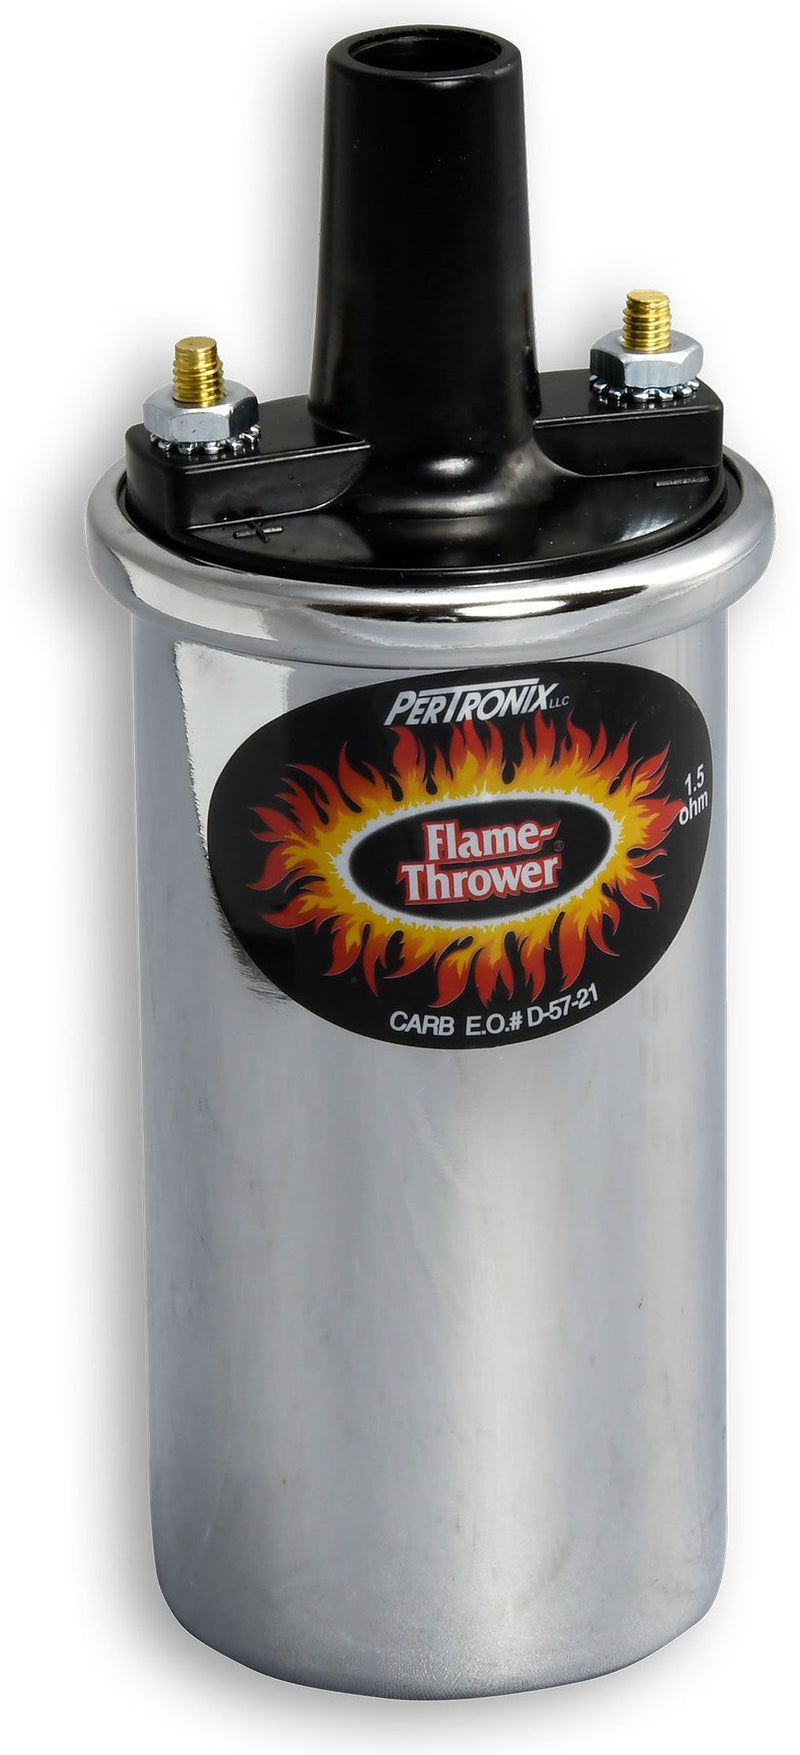 Patriot Exhaust Pertronic Flame-Thrower Canister Coil - Chrome PATH40001